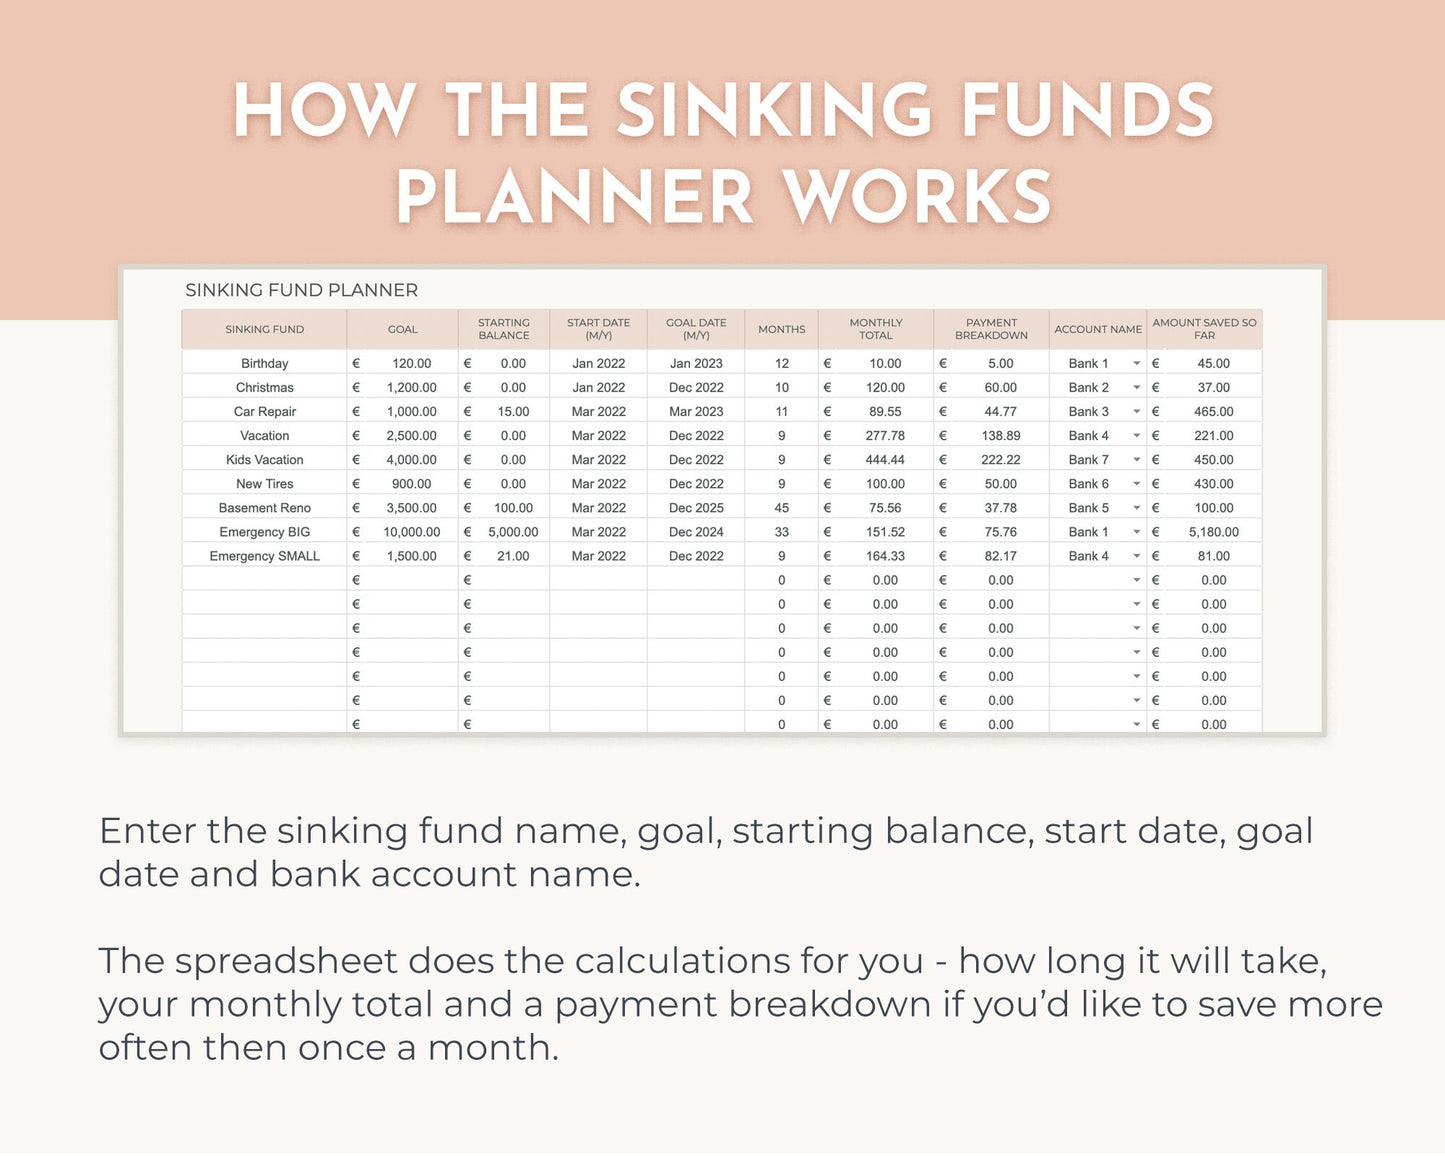 Sinking Funds Tracker - Updated!